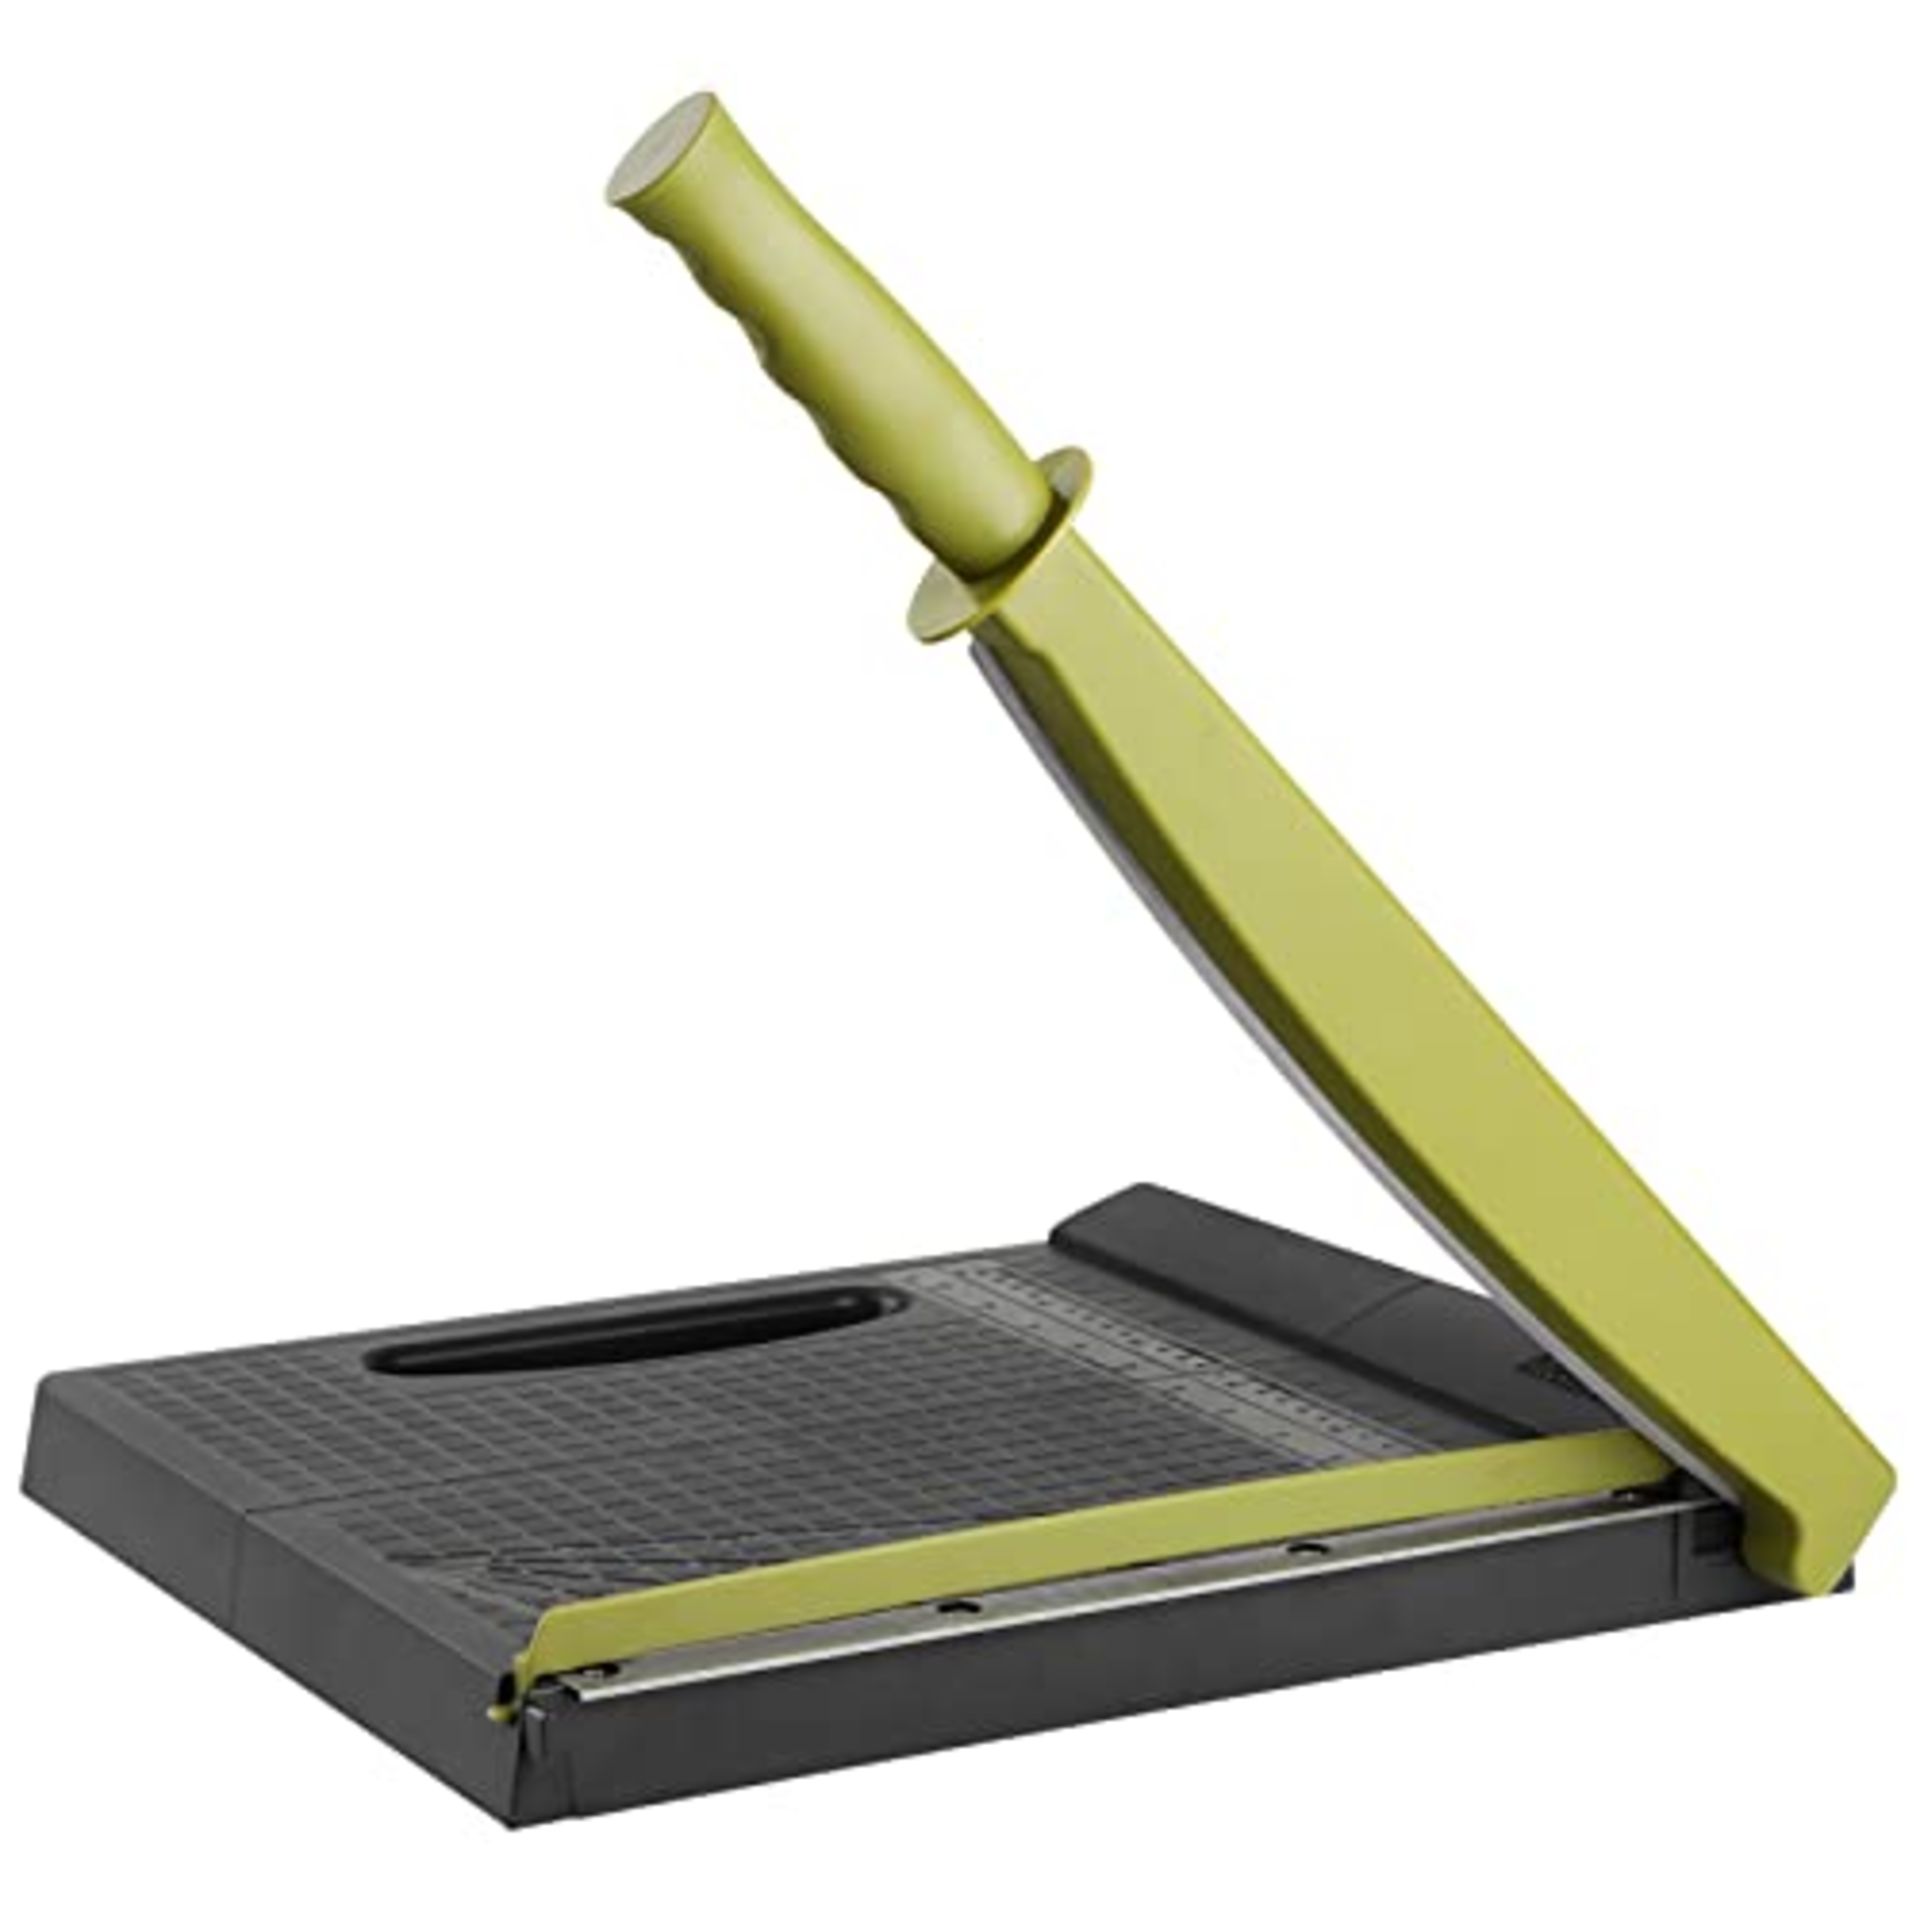 A4 Paper Cutter Guillotine, 12" Cut Length, 16 Sheets Capacity, Portable Stack Paper T - Image 4 of 12